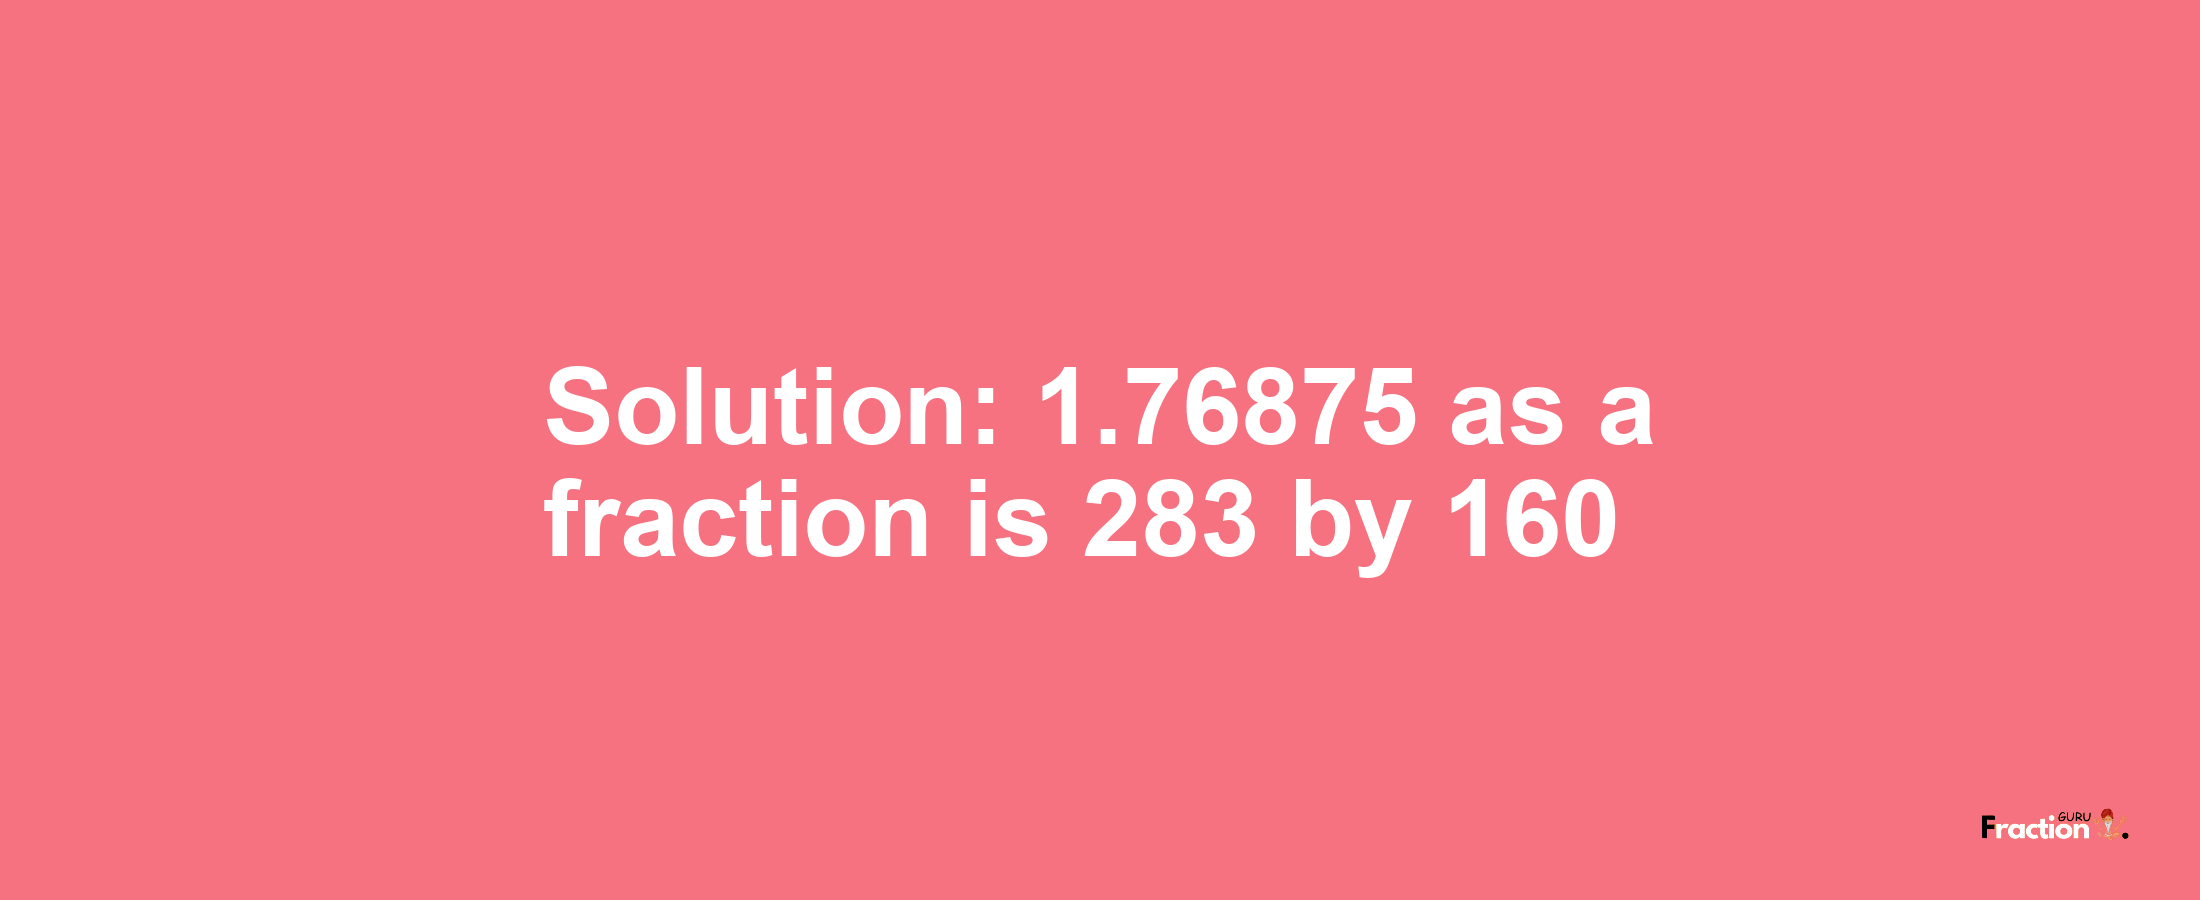 Solution:1.76875 as a fraction is 283/160